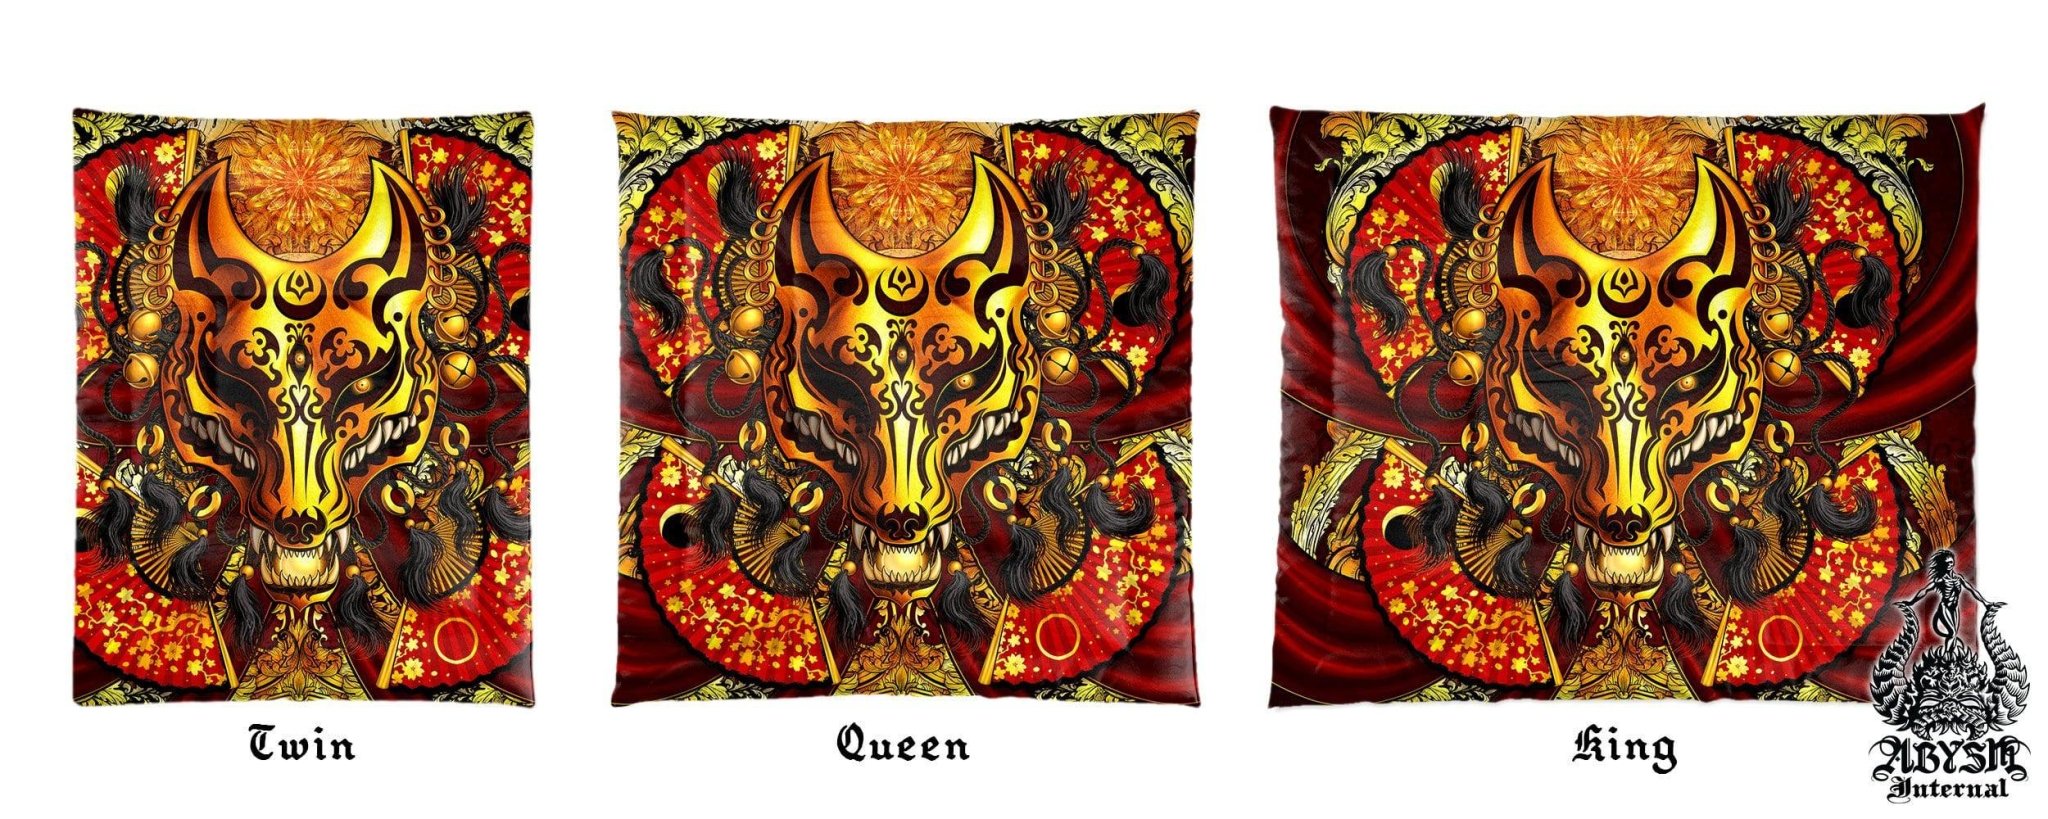 Kitsune Mask Bedding Set, Comforter and Duvet, Gamer Bed Cover and Bedroom Decor, Japanese Fox Mask, Okami, King, Queen and Twin Size - Gold - Abysm Internal